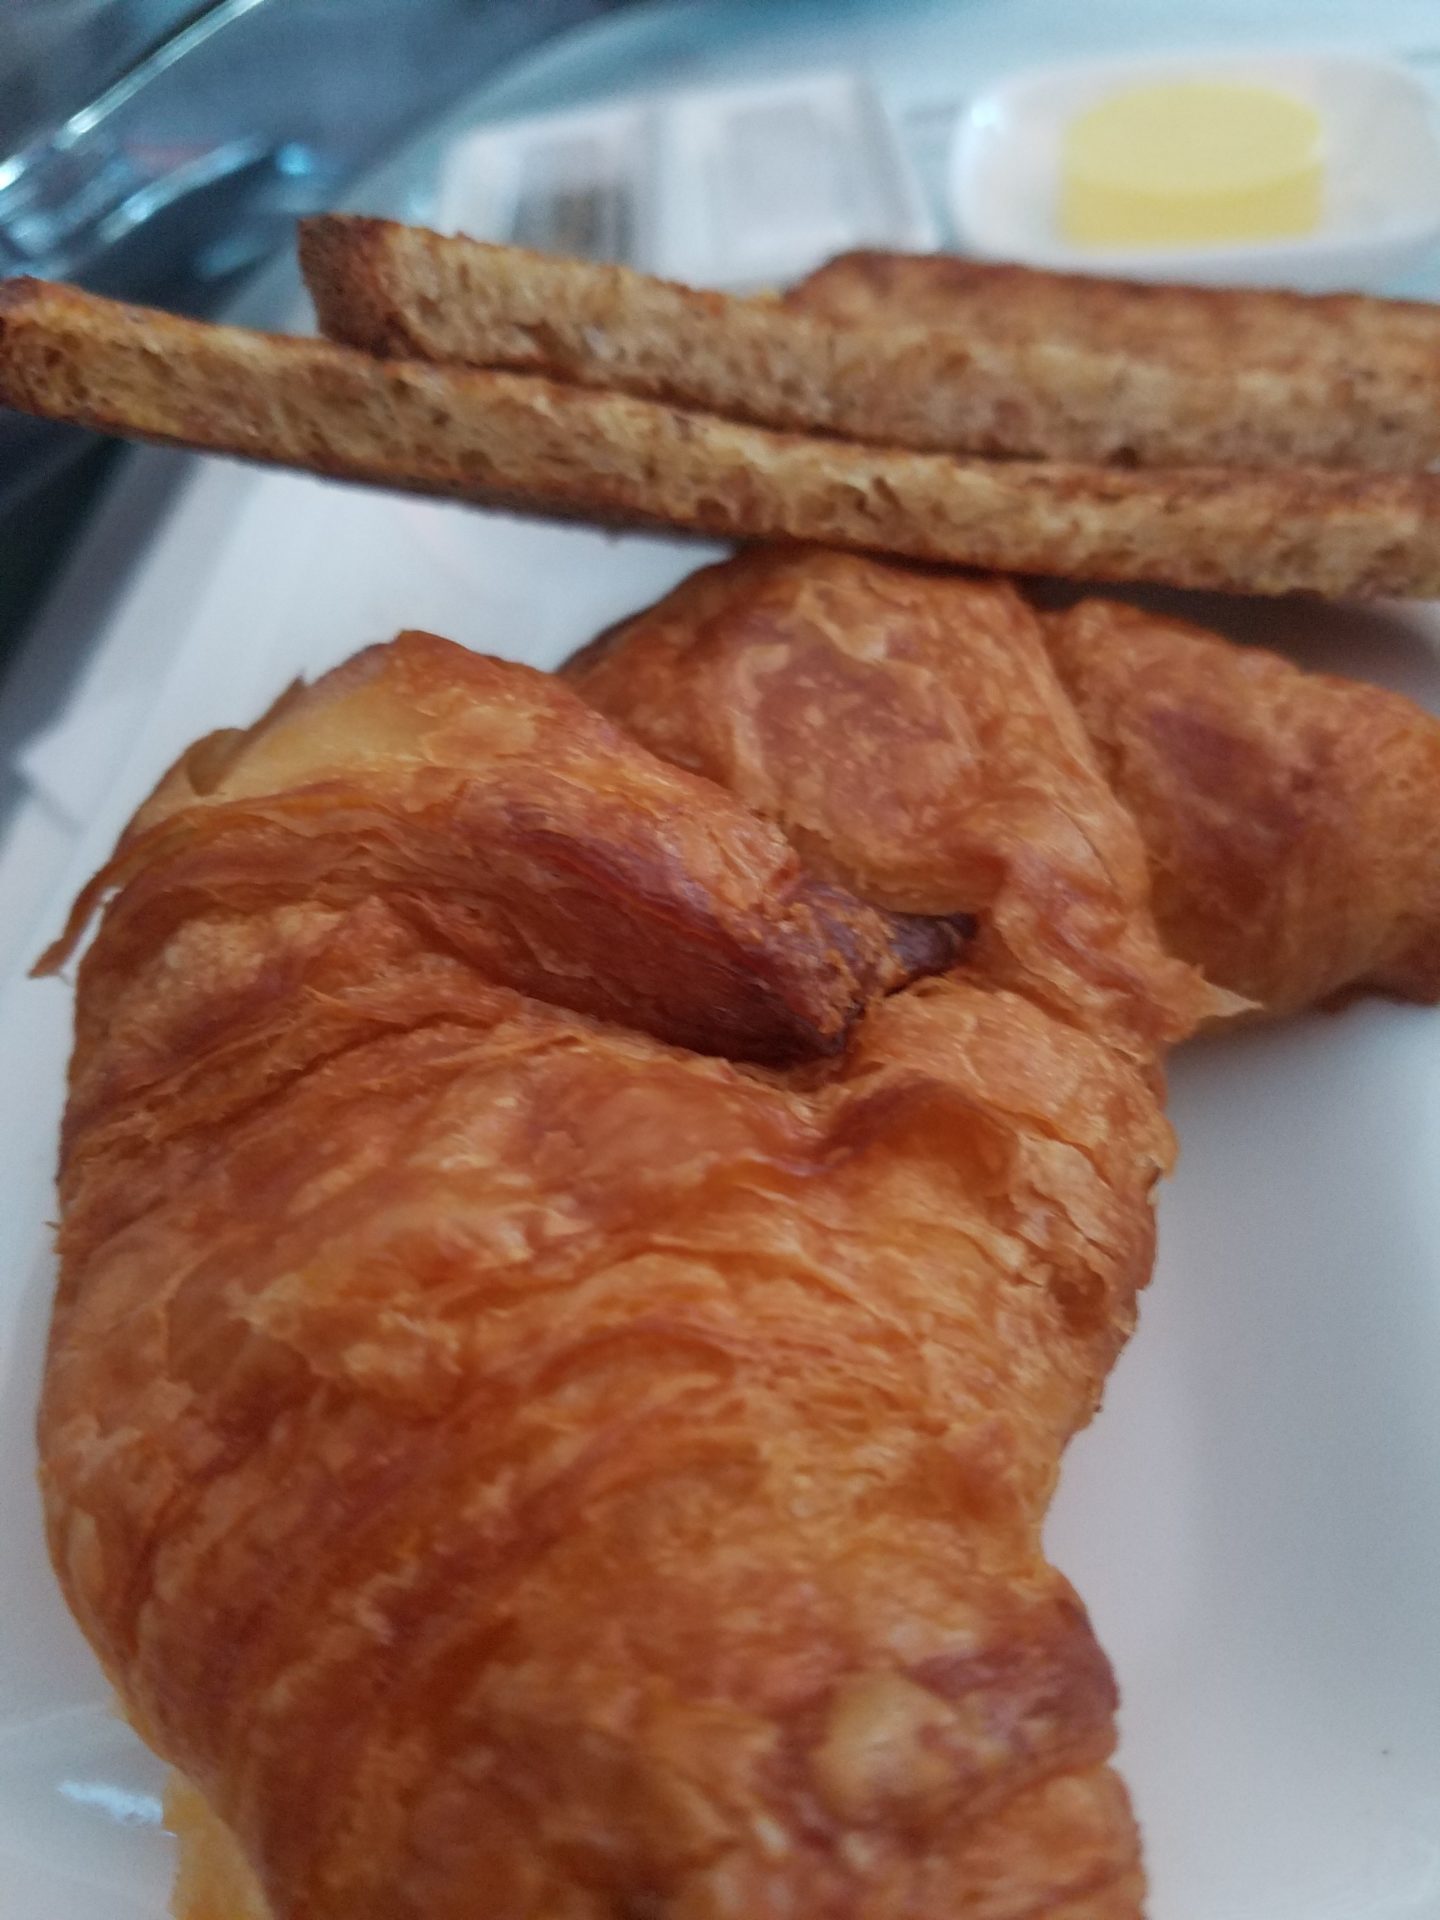 a croissant and toast on a plate